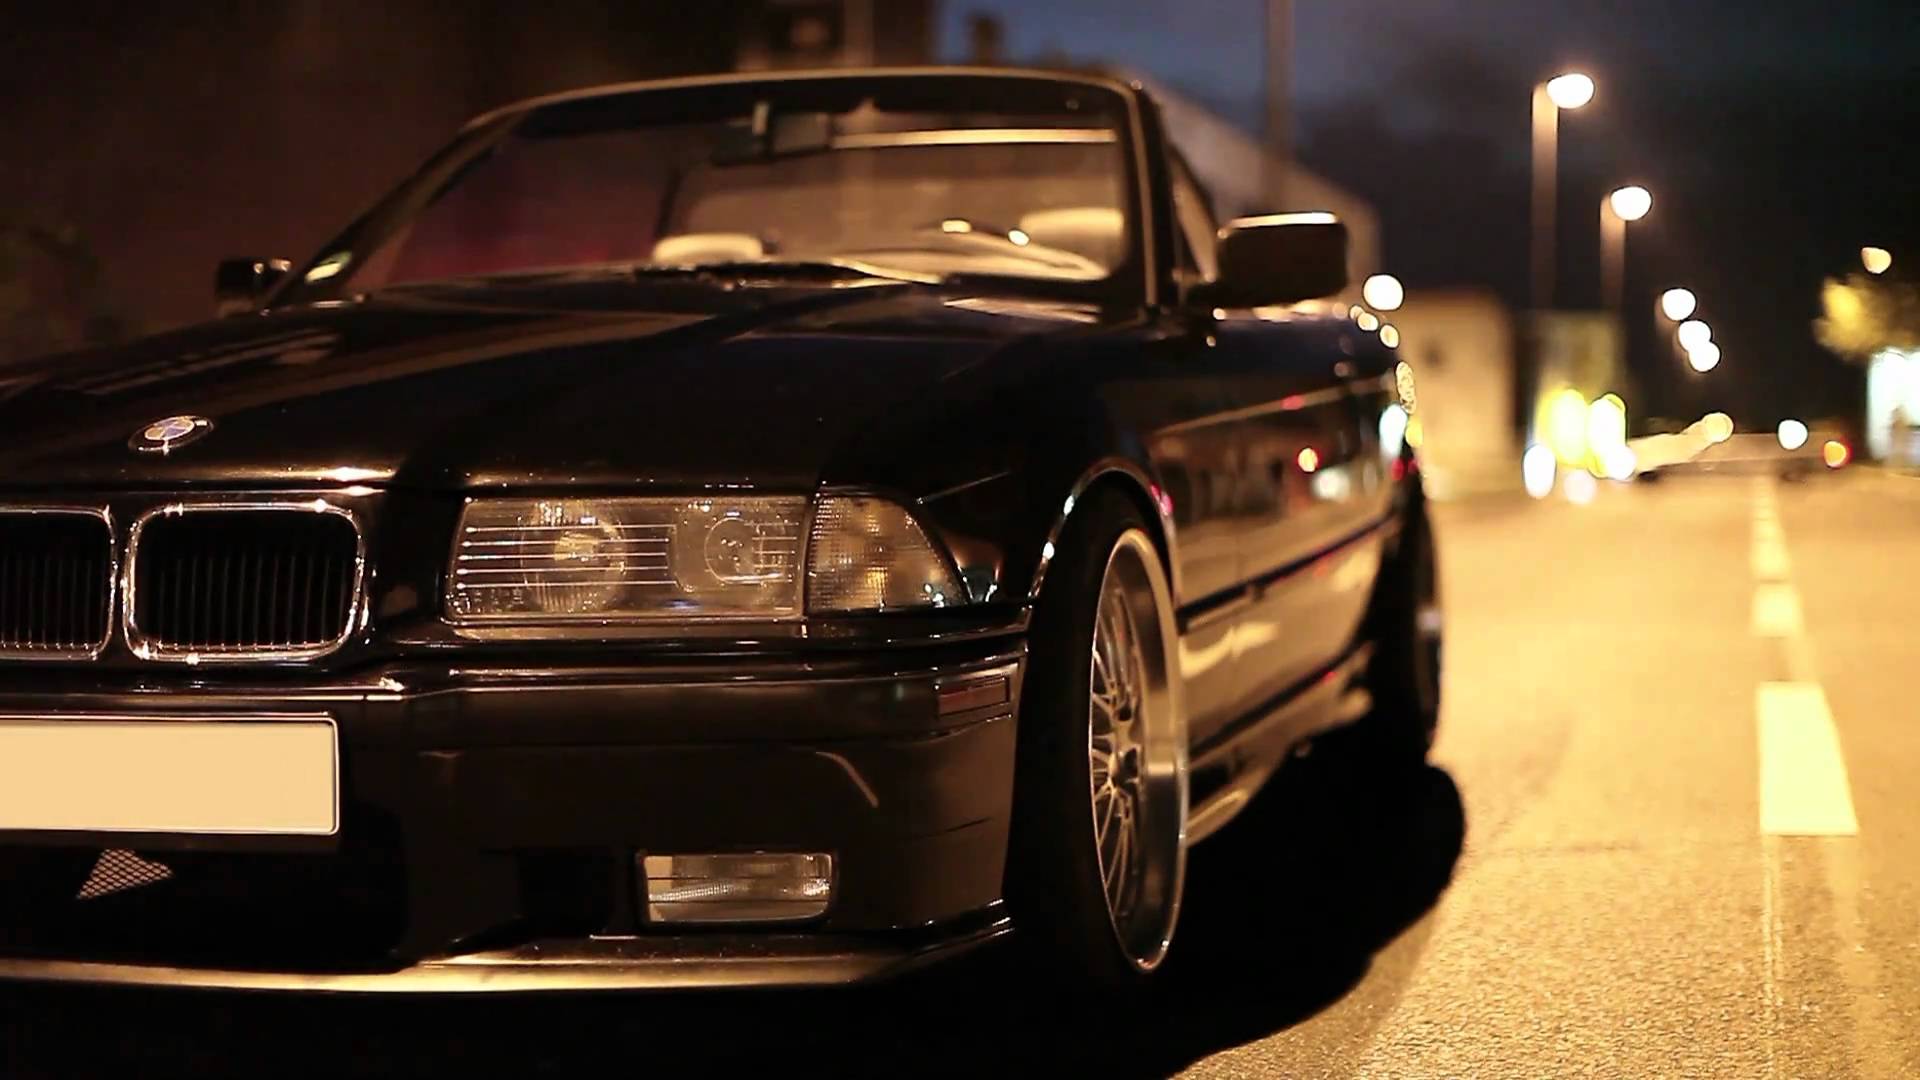 BMW E36. Cars. BMW and Cars